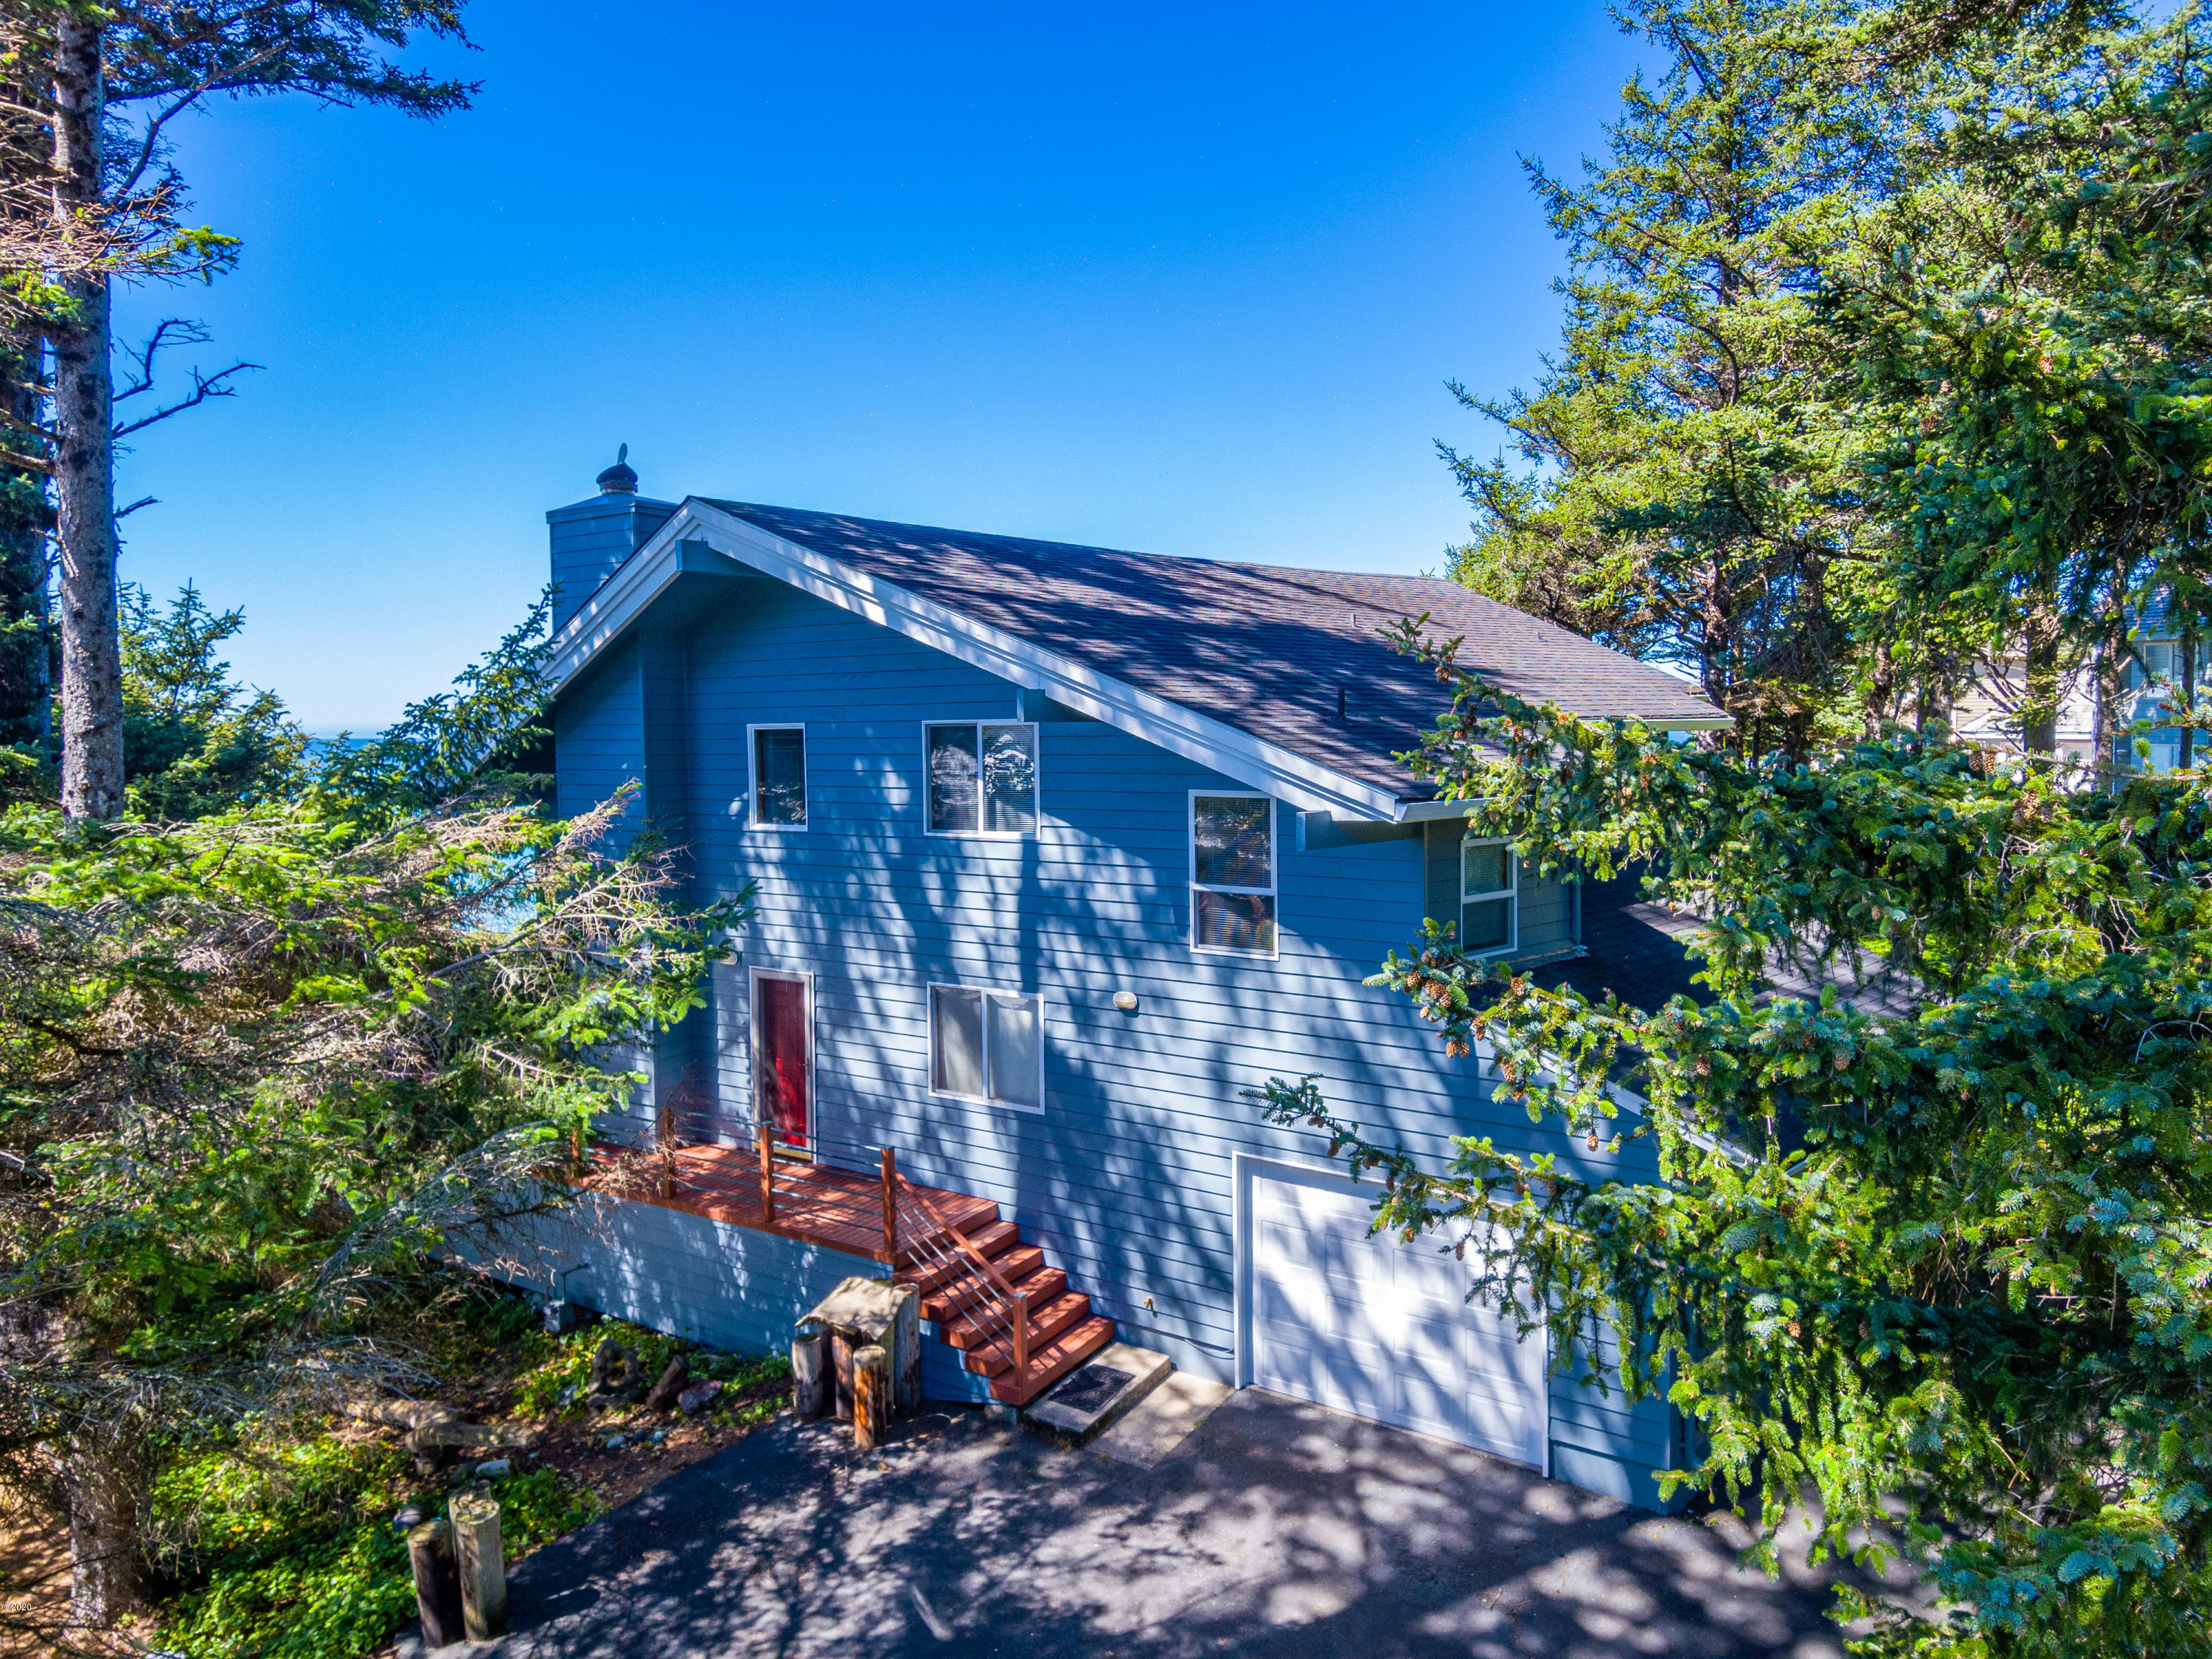 445 SW Overlook Depoe Bay, Gleneden Beach, Lincoln City, Newport, Otis, Rose Lodge, Seal Rock, Waldport, Yachats, To Home Listings - Amy Plechaty, Emerald Coast Realty Real Estate, homes for sale, property for sale